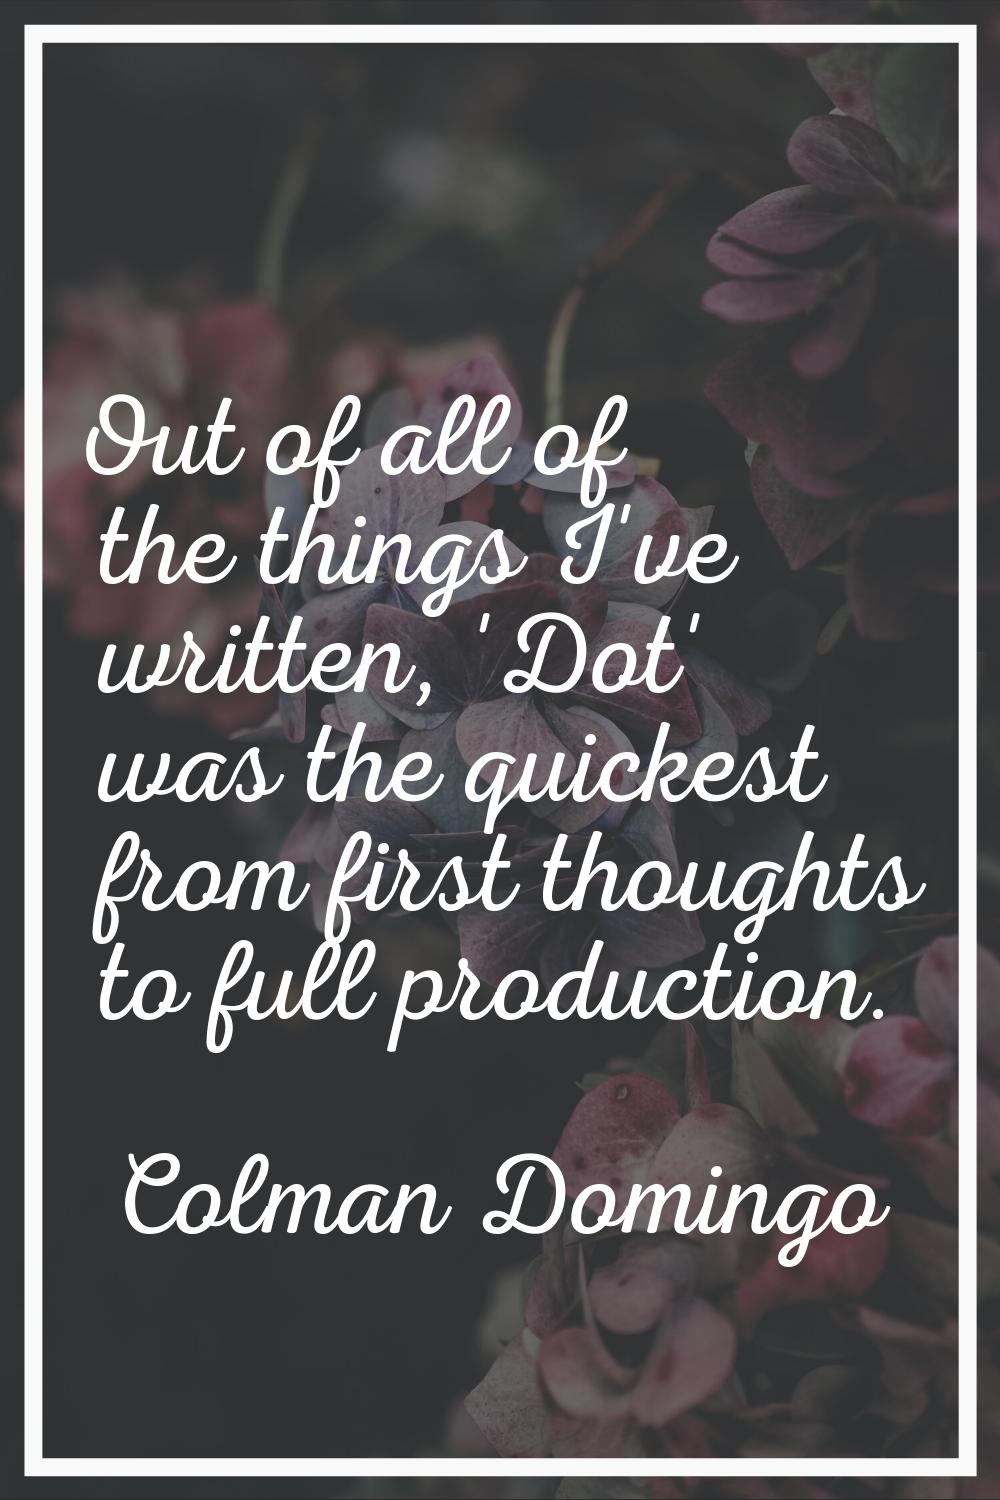 Out of all of the things I've written, 'Dot' was the quickest from first thoughts to full productio